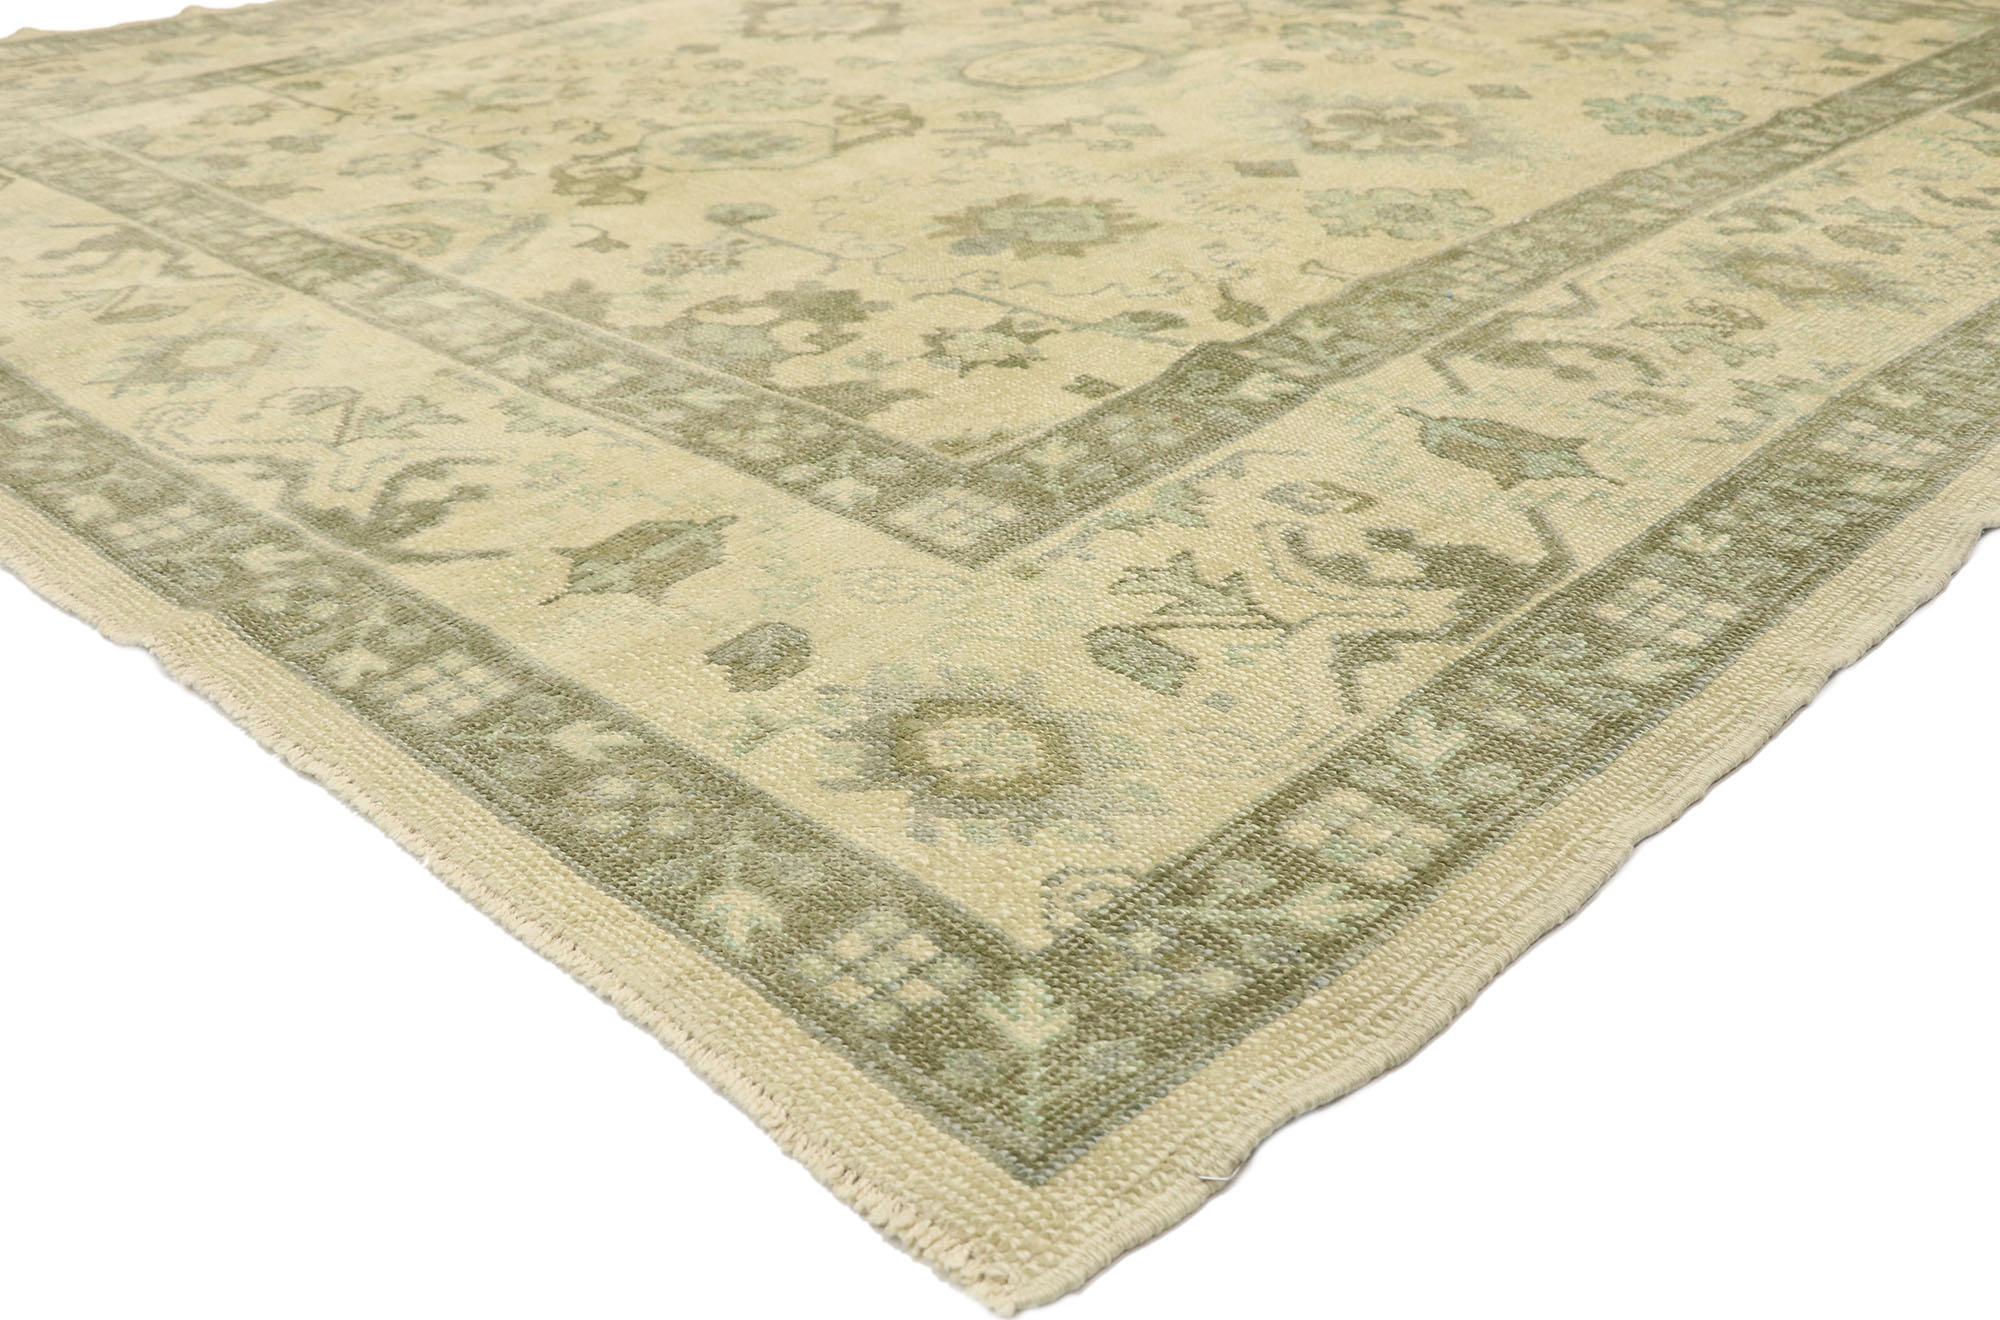 52923 new contemporary Turkish Oushak rug with modern transitional coastal style 08'03 x 09'03. Blending elements from the modern world with light and airy colors, this hand knotted wool contemporary Turkish Oushak rug will boost the coziness factor